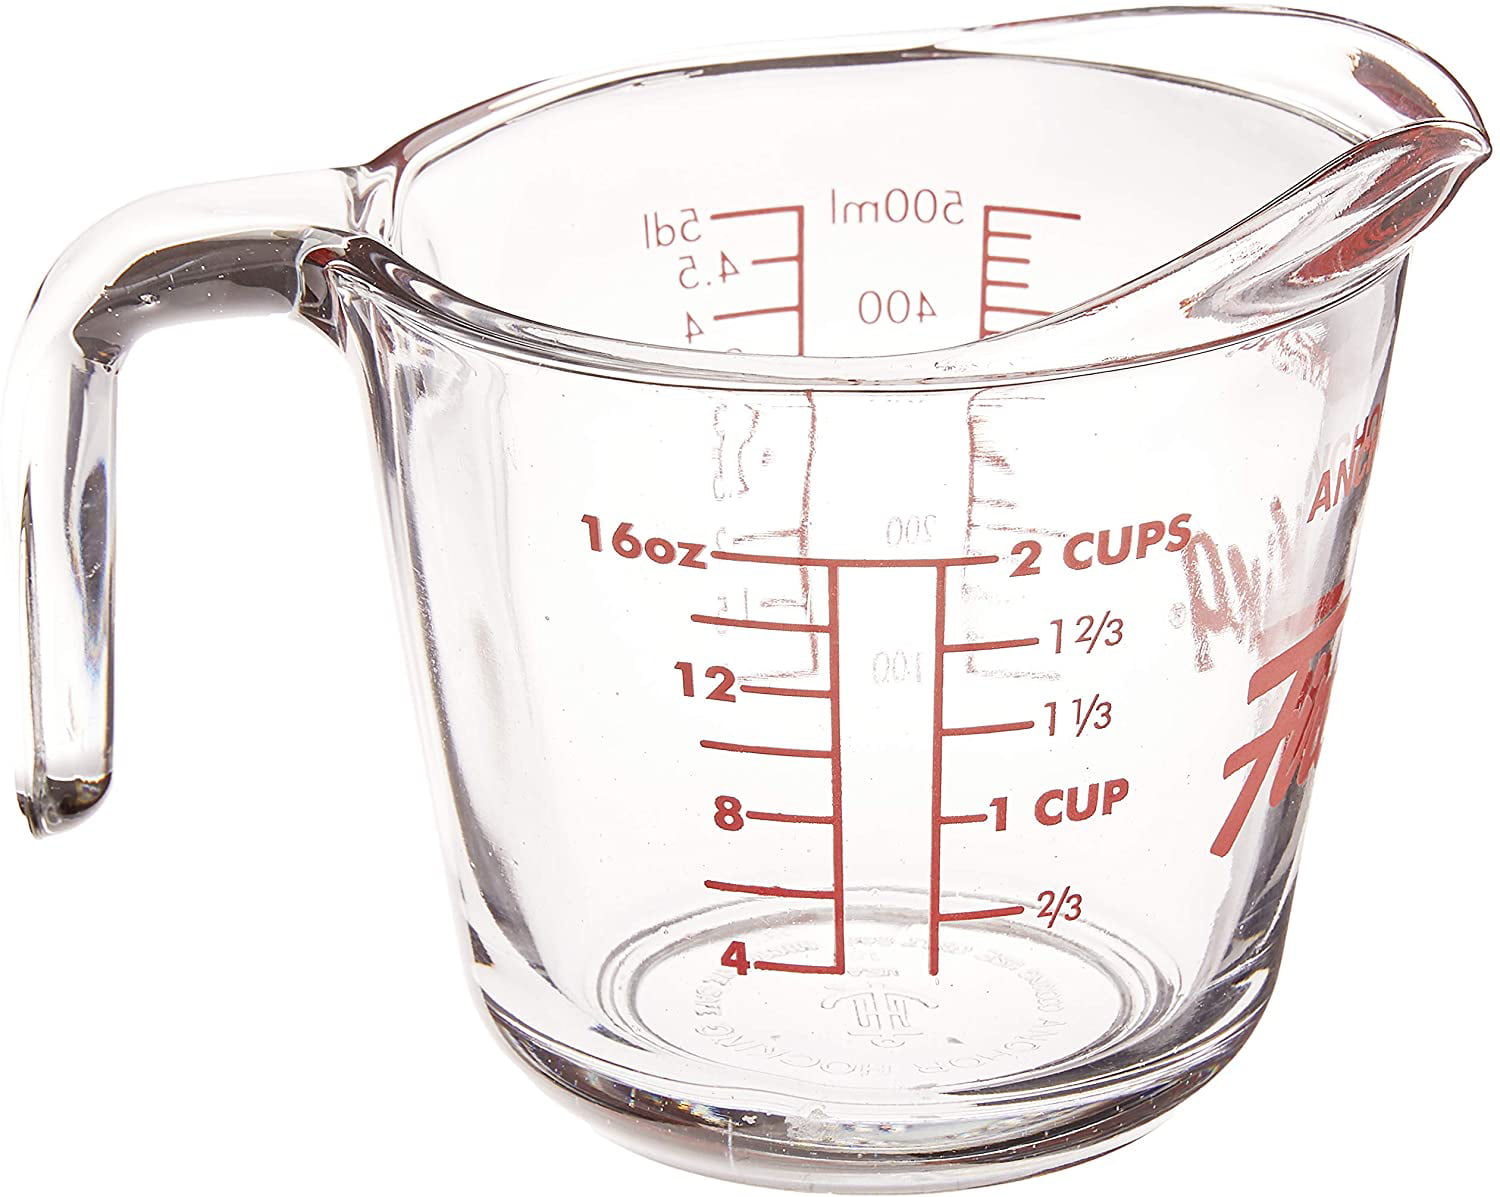 Fire King Glass Liquid Measuring Cup - 1 Cup / 250ml